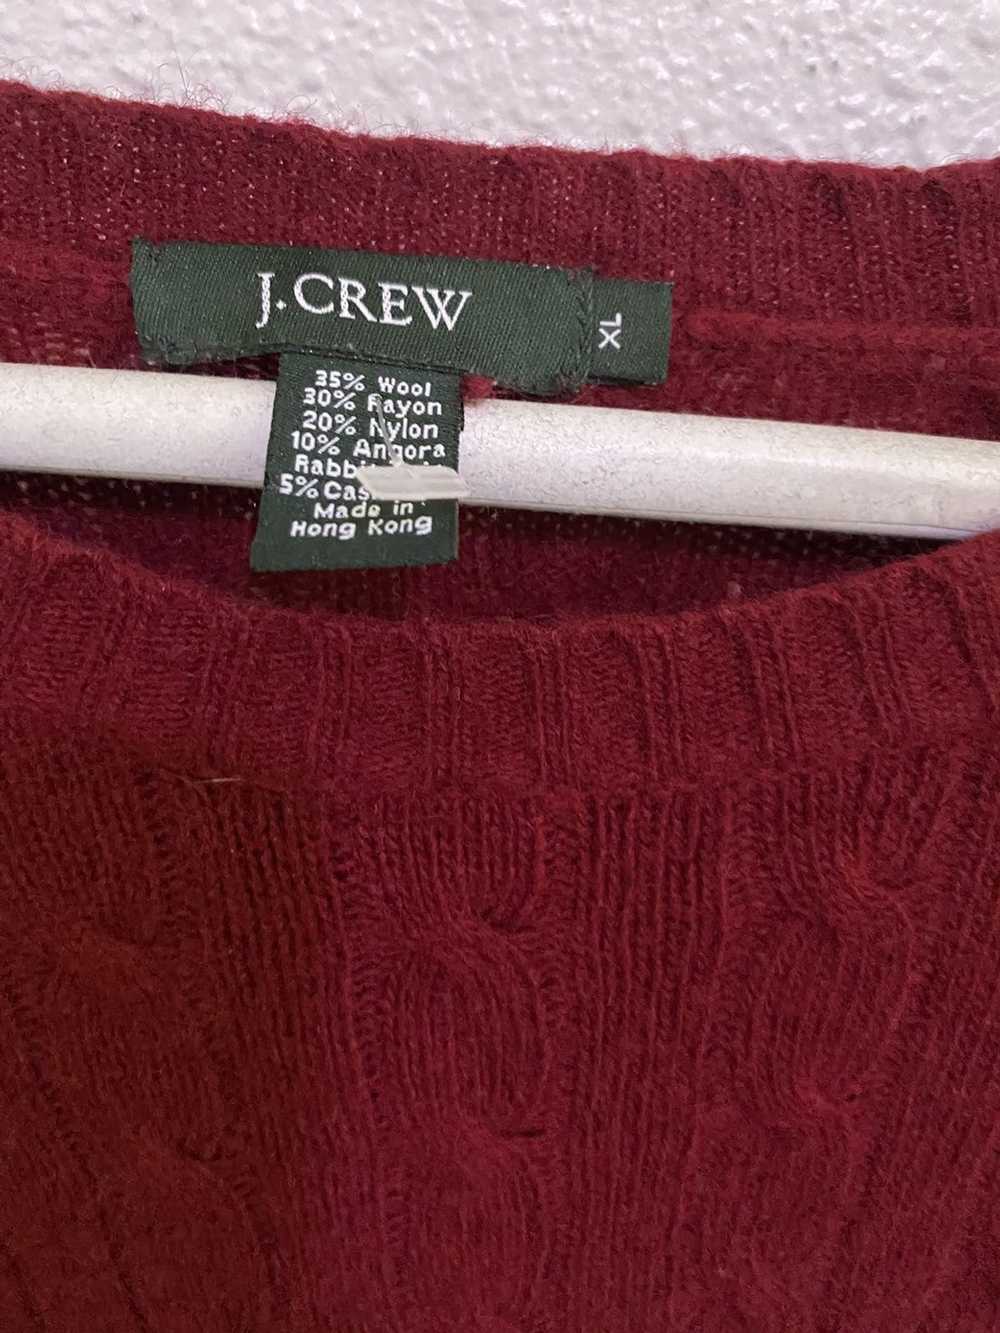 J.Crew J Crew Knitted sweater - image 2